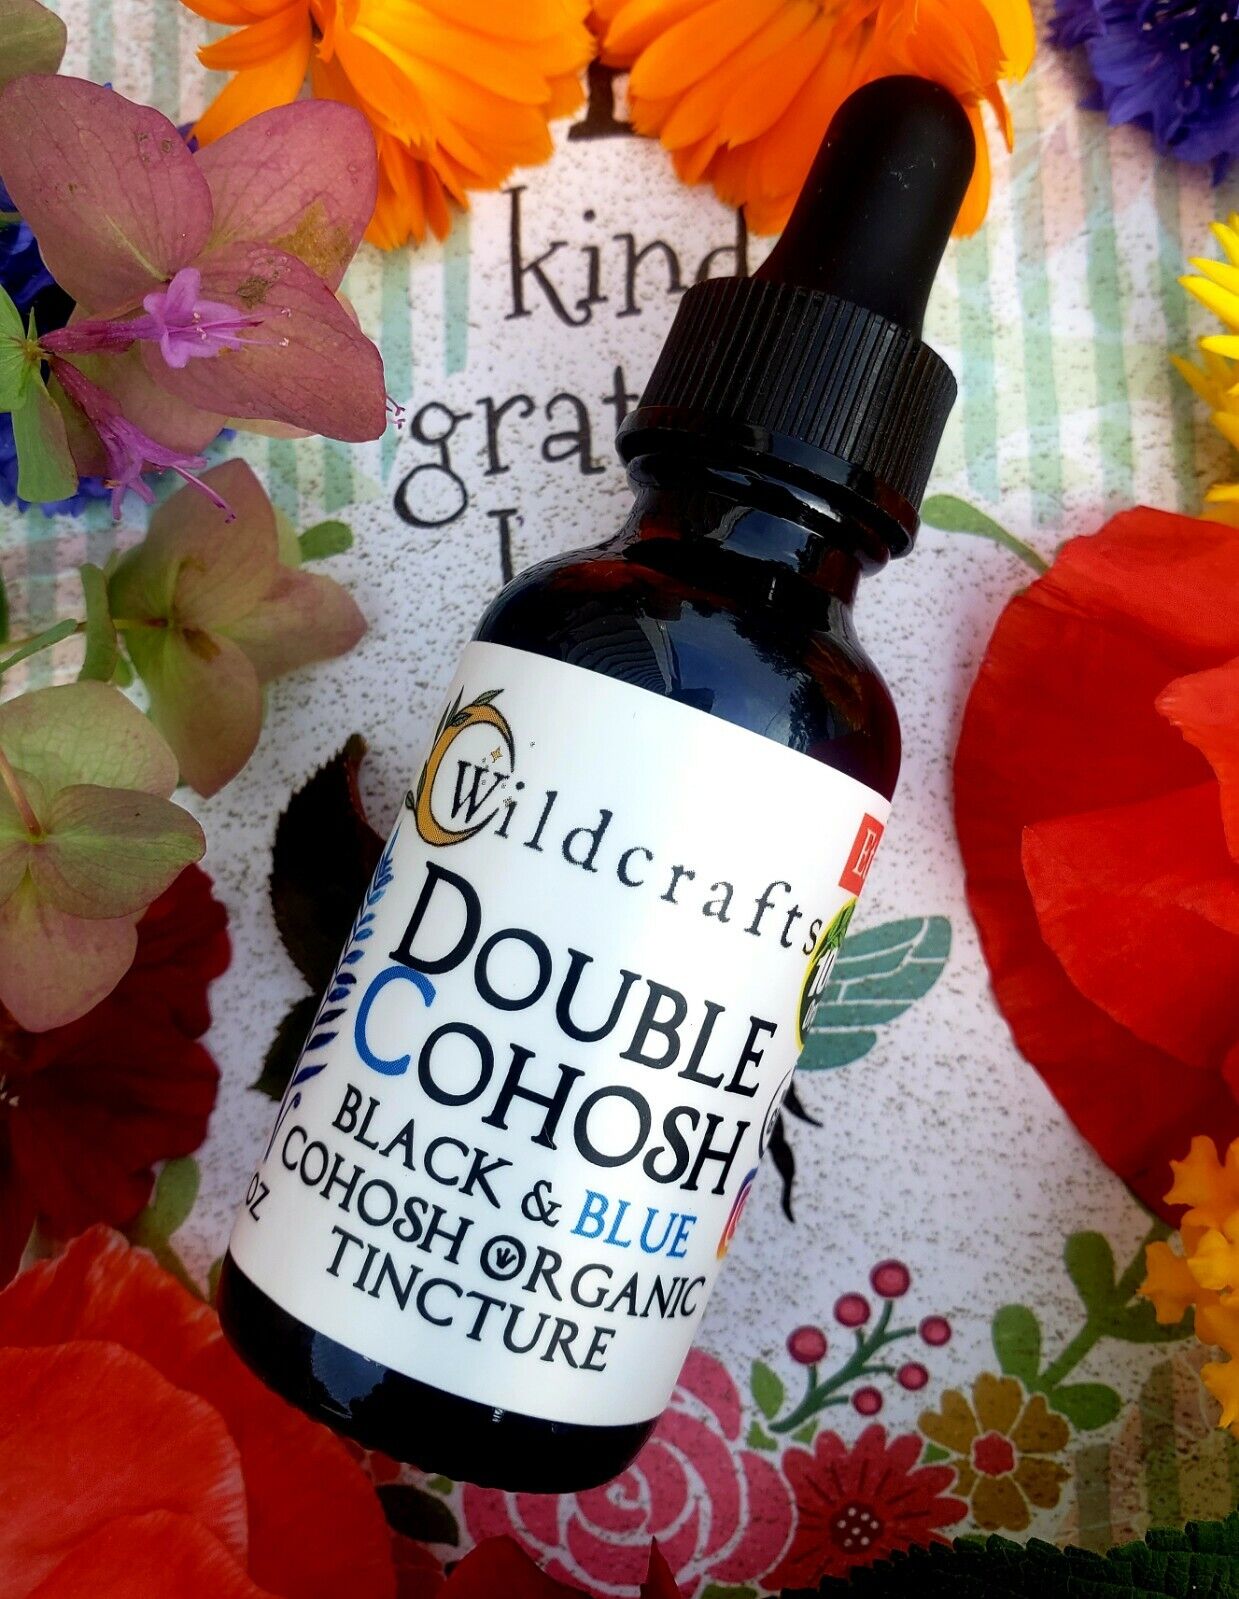 Organic Black Cohosh and Blue Cohosh Handcrafted Tincture Aged 1 Year for Women